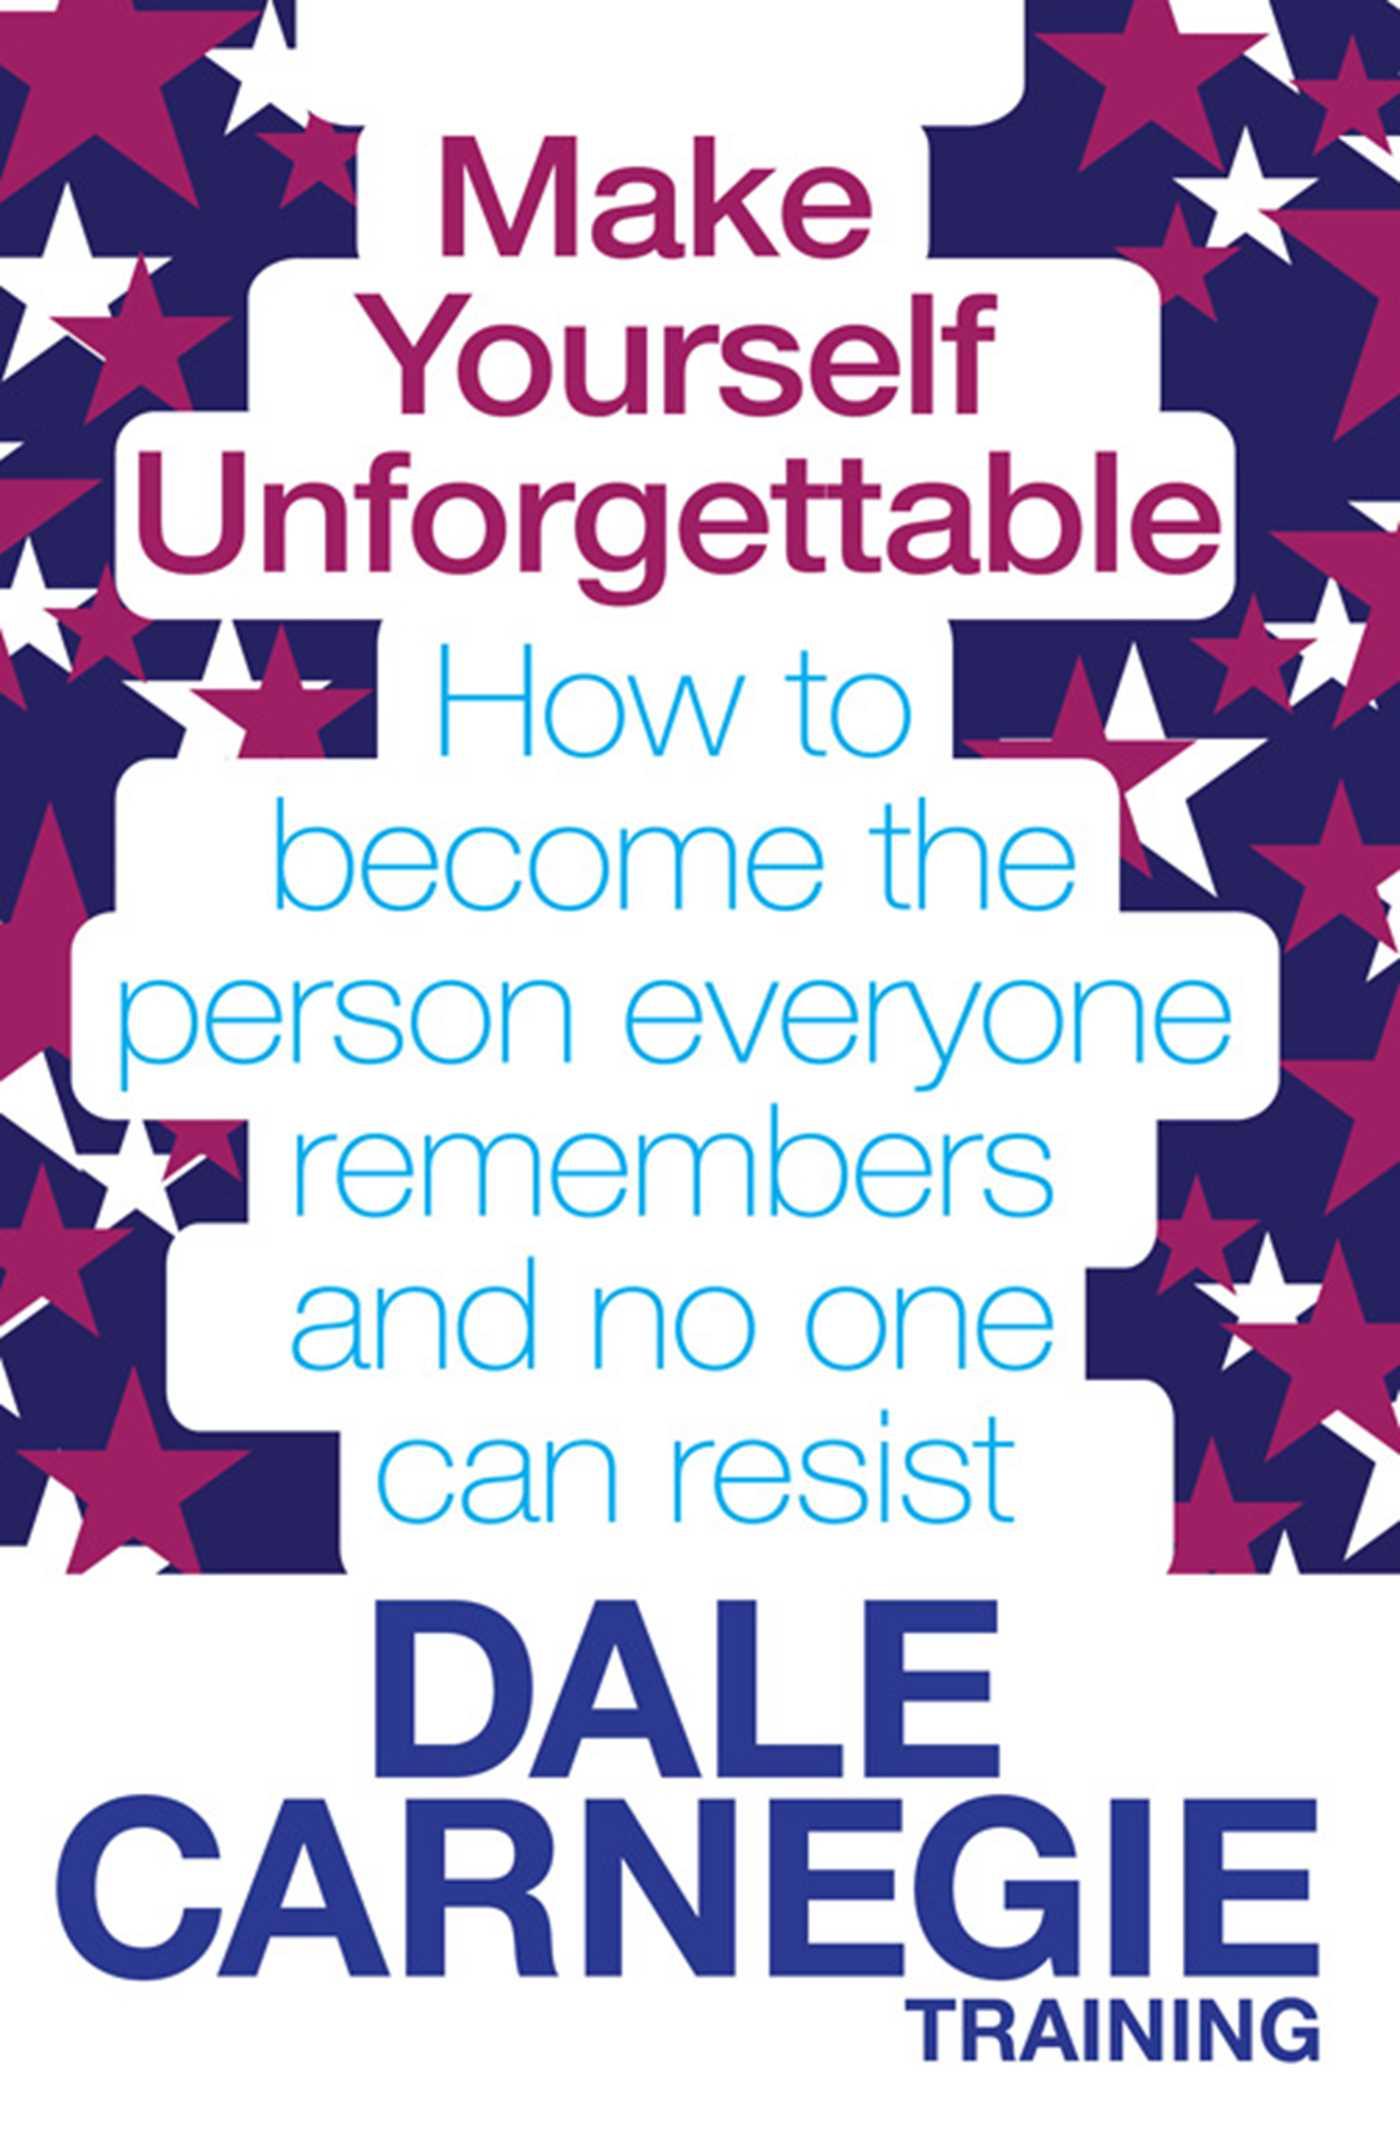 Make Yourself Unforgettable / How to become the person everyone remembers and no one can resist / Dale Carnegie Training / Taschenbuch / 226 S. / Englisch / 2011 / Simon & Schuster Ltd - Carnegie Training, Dale